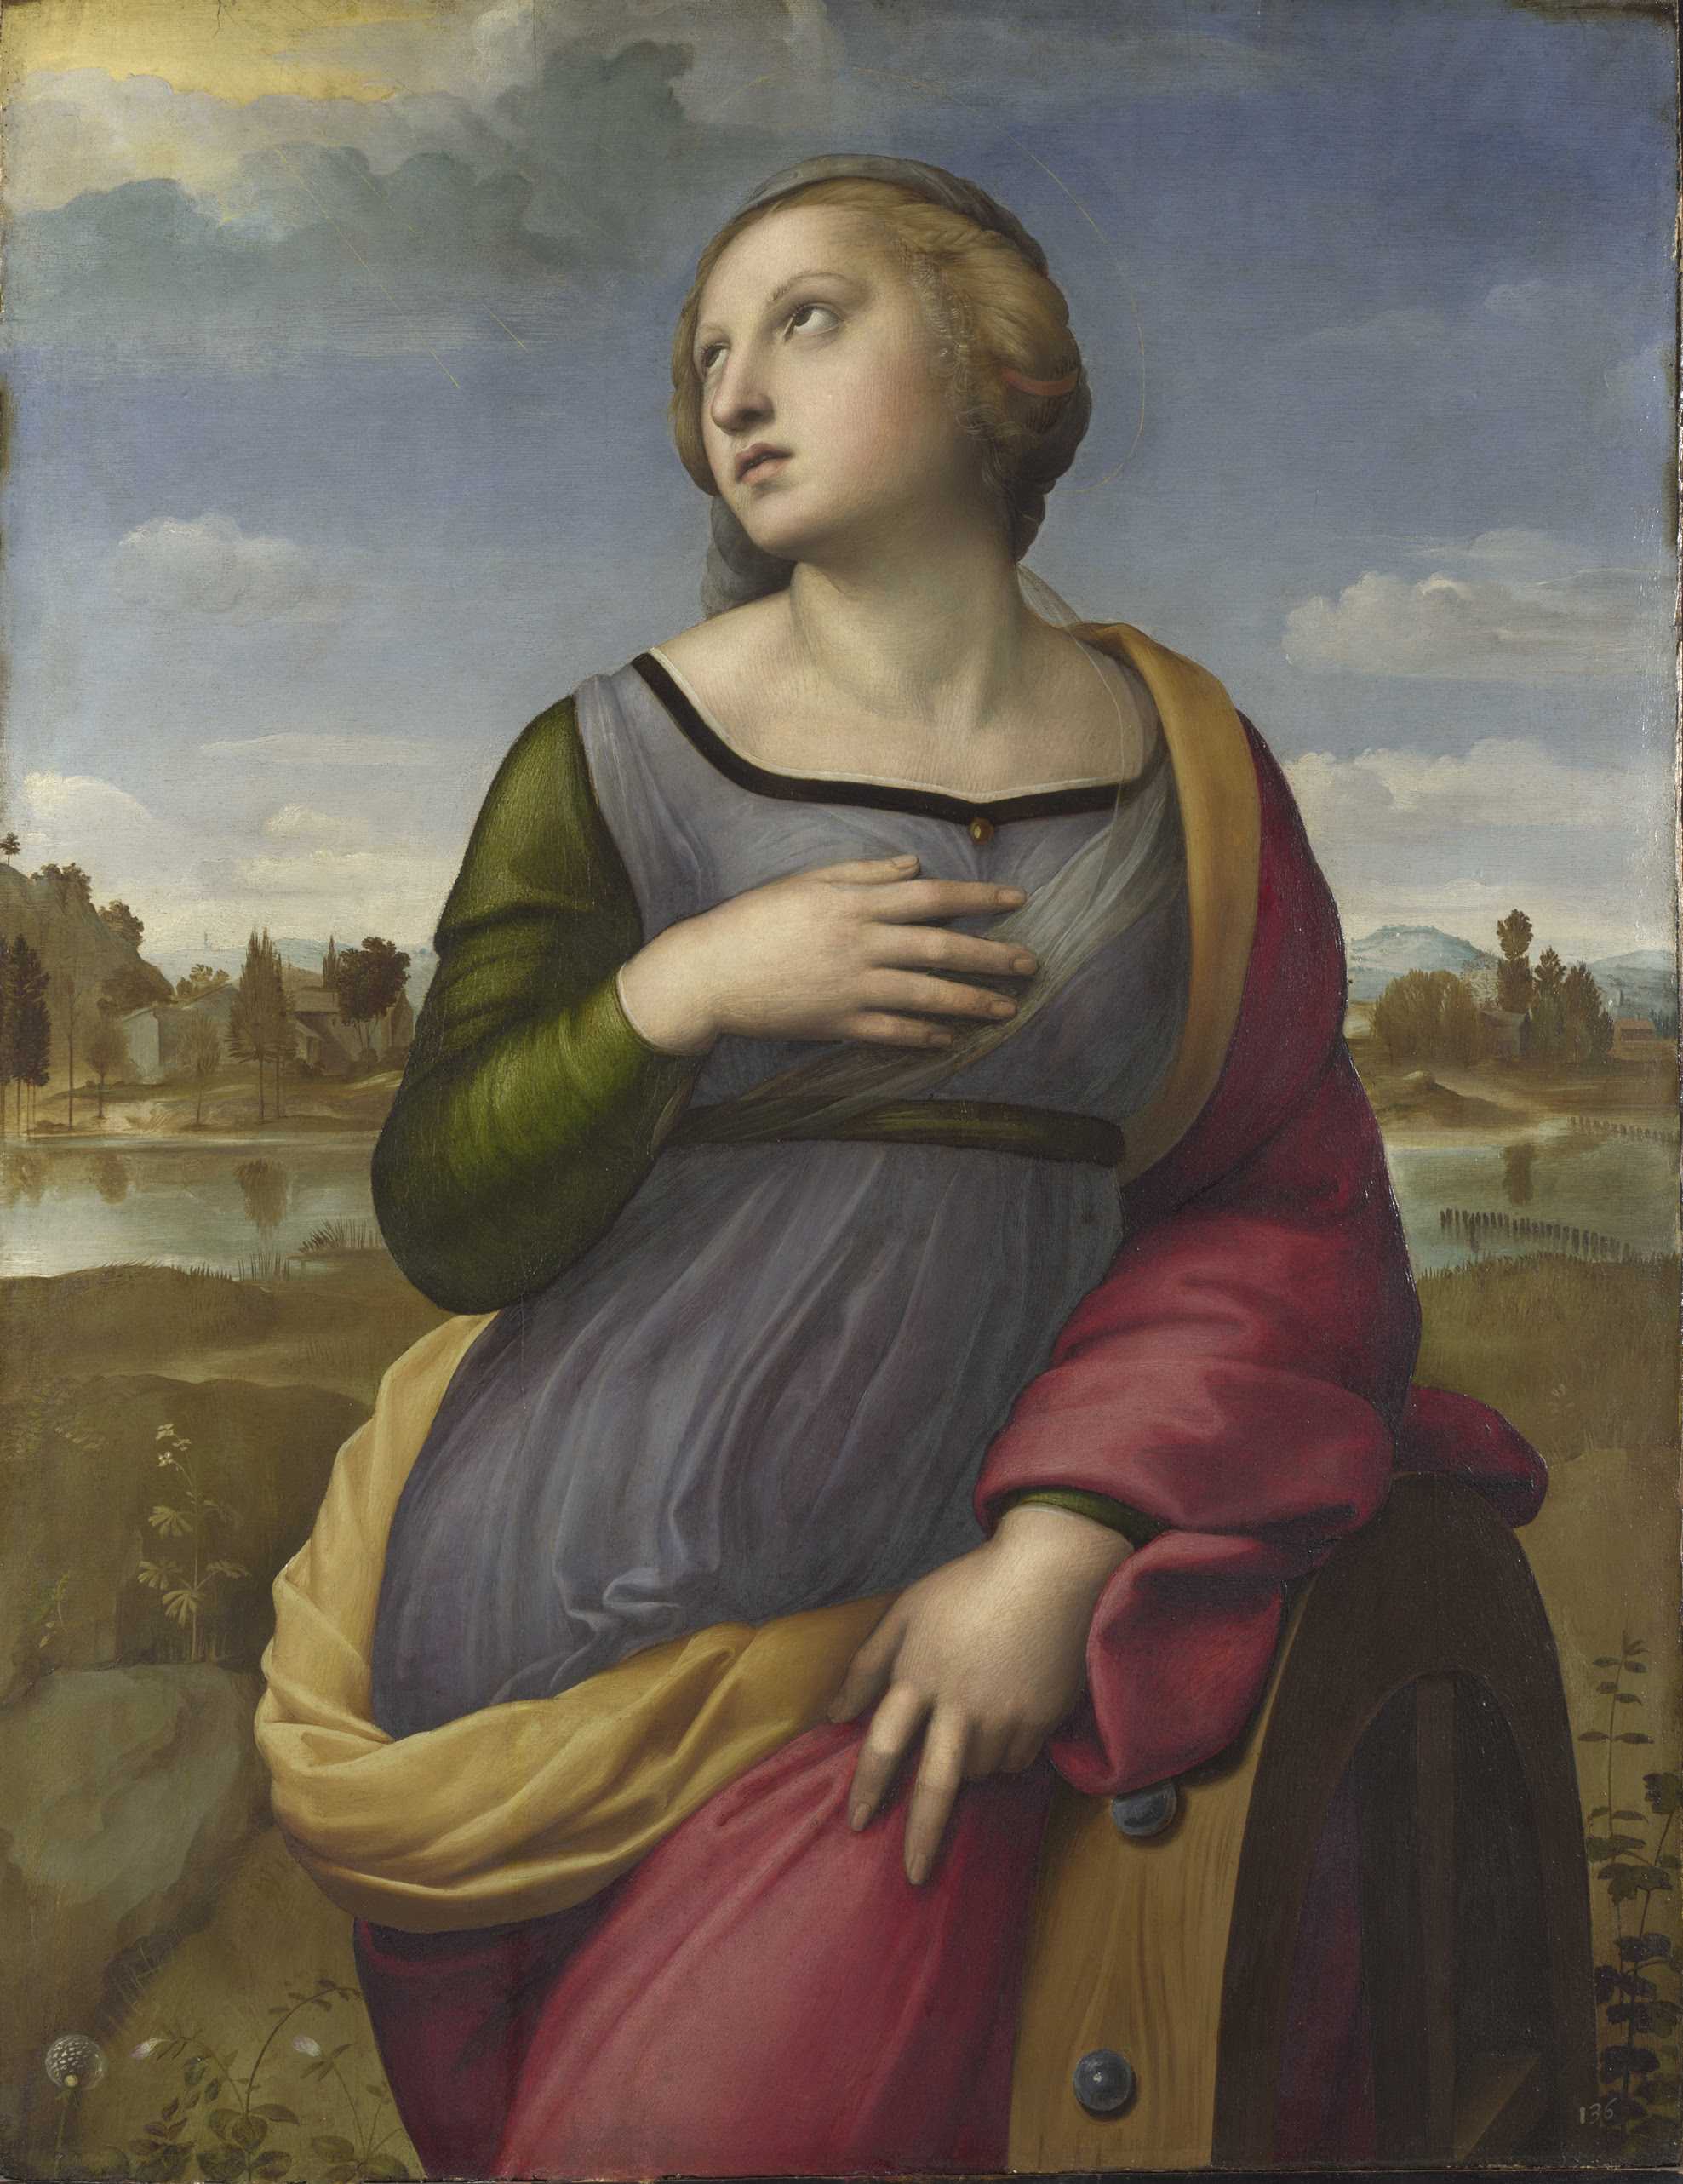 Raphael, Saint Catherine of Alexandria, about 1507 © The National Gallery, London